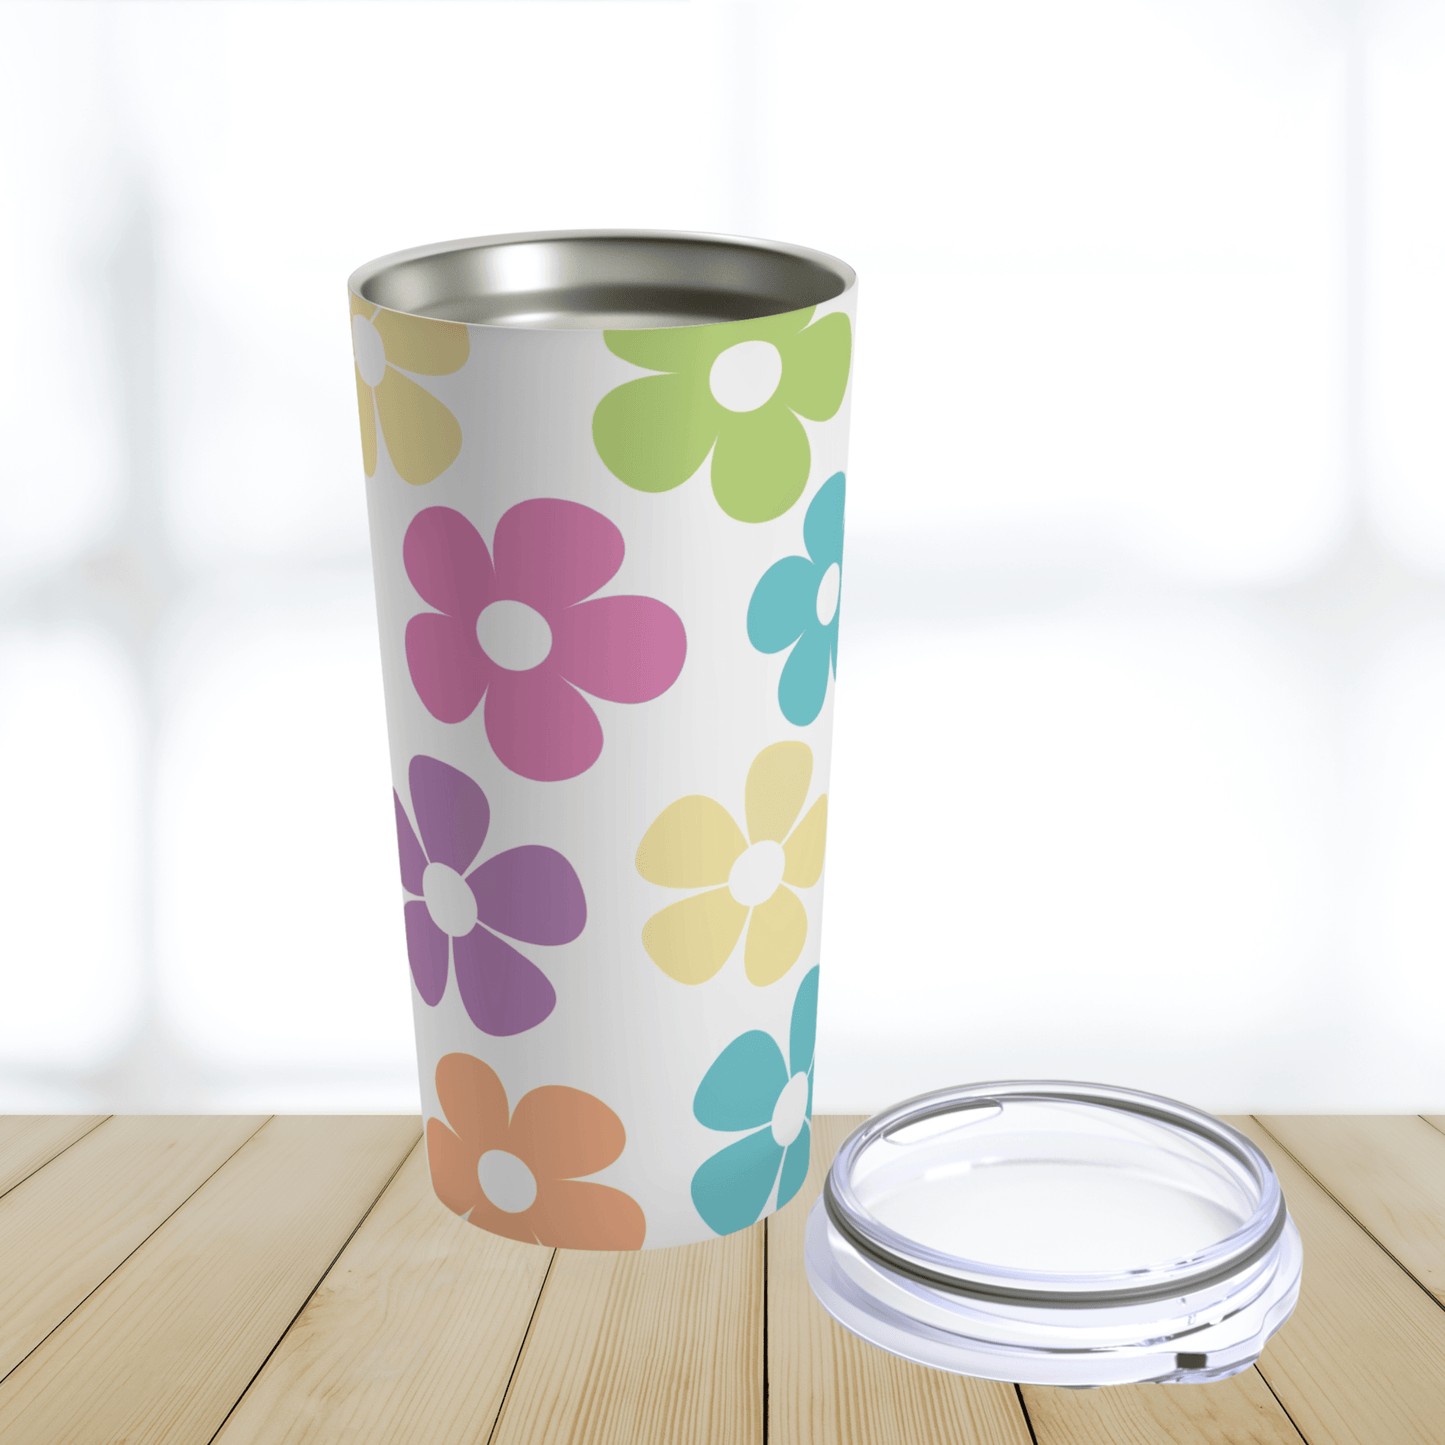 OUr cute tumbler is the perfect gift under thirty dollars for any woman. The pinks, blues purples orange and lime green flowers have a retro feel. This shows the stainless steel cup that is dishwasher safe and the clear lid.